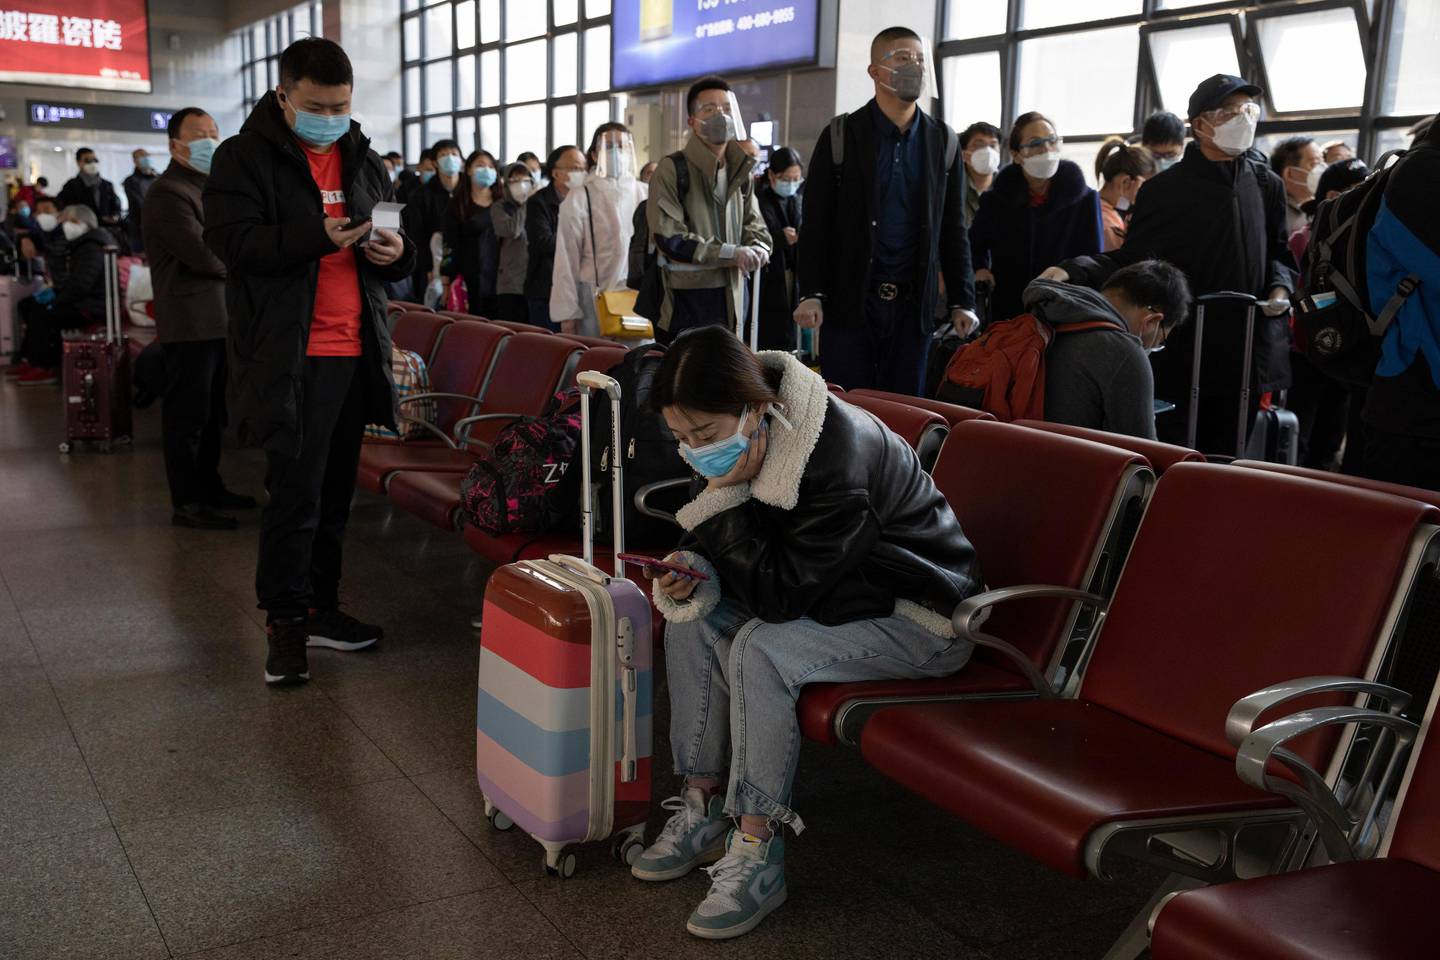 A woman wearing a mask checks her phone as others line up to board a train at a train station in Beijing on Sunday, March 29, 2020. As the coronavirus epicenter has shifted westward, the situation has calmed in China, with falling death rates and most new cases coming from abroad, restrictions on travel have been slowly lifted. (AP Photo/Ng Han Guan)